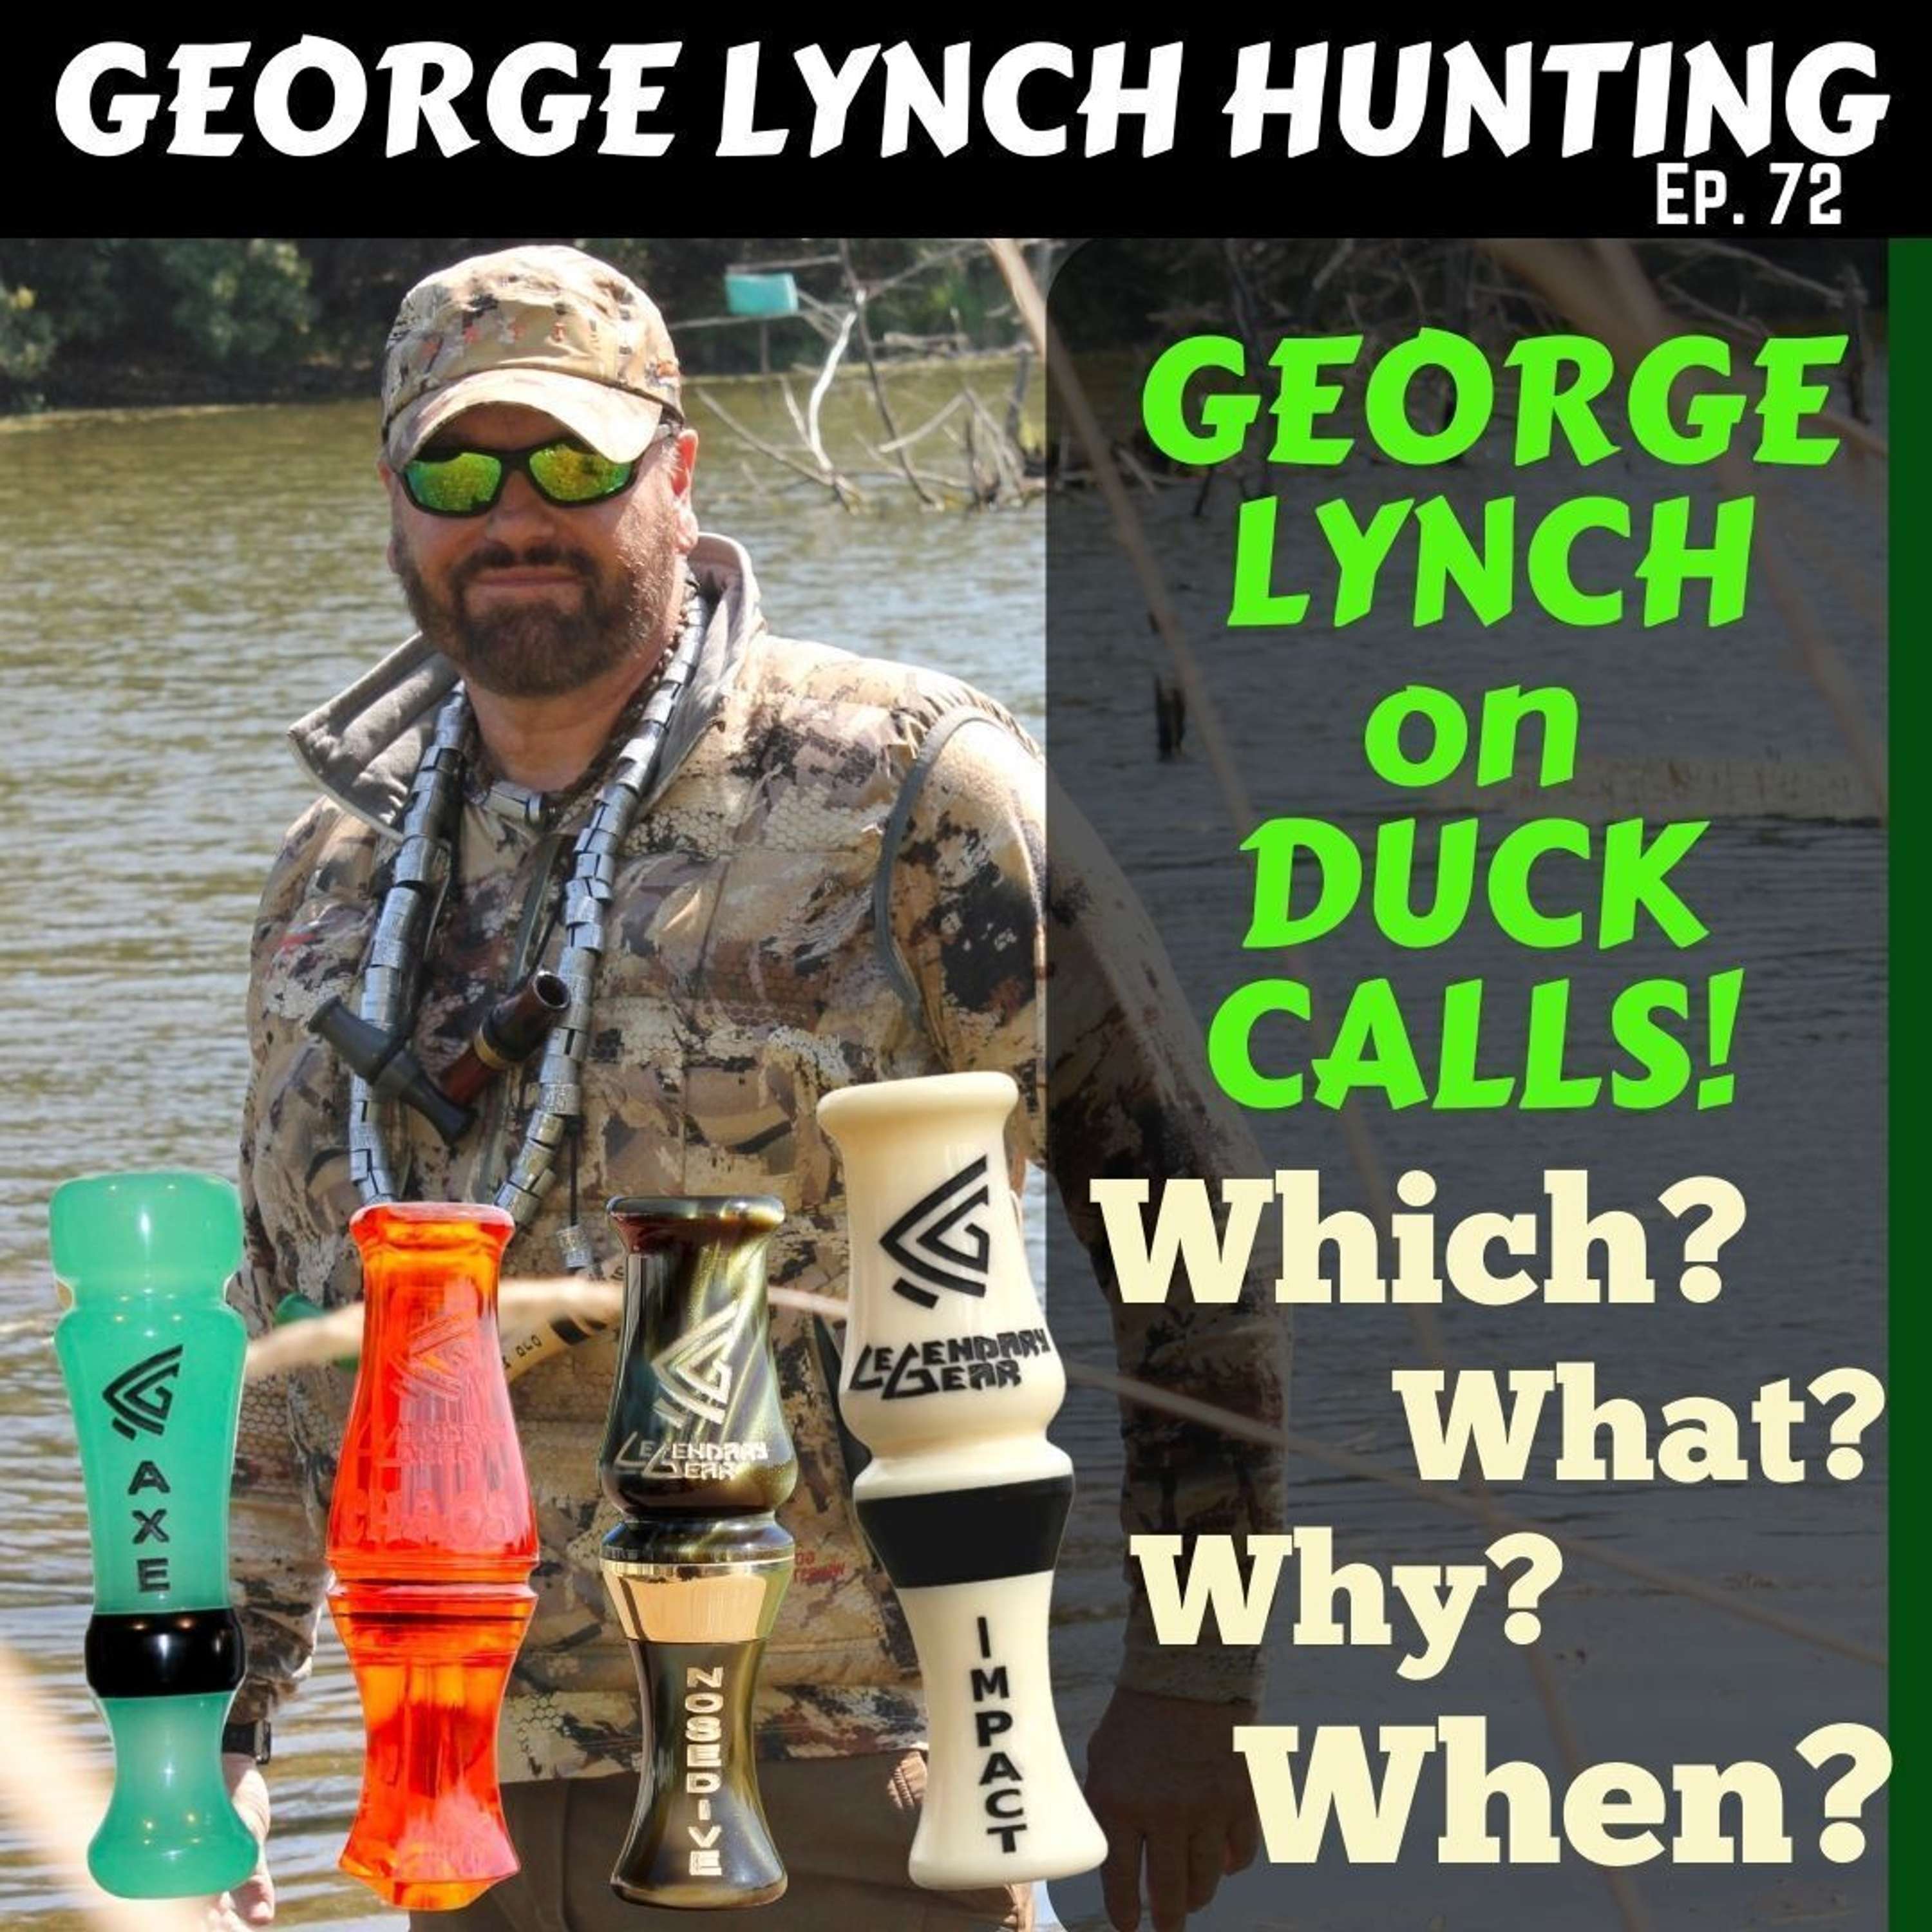 GEORGE LYNCH on DUCK CALLS! Which? What? Why? When?